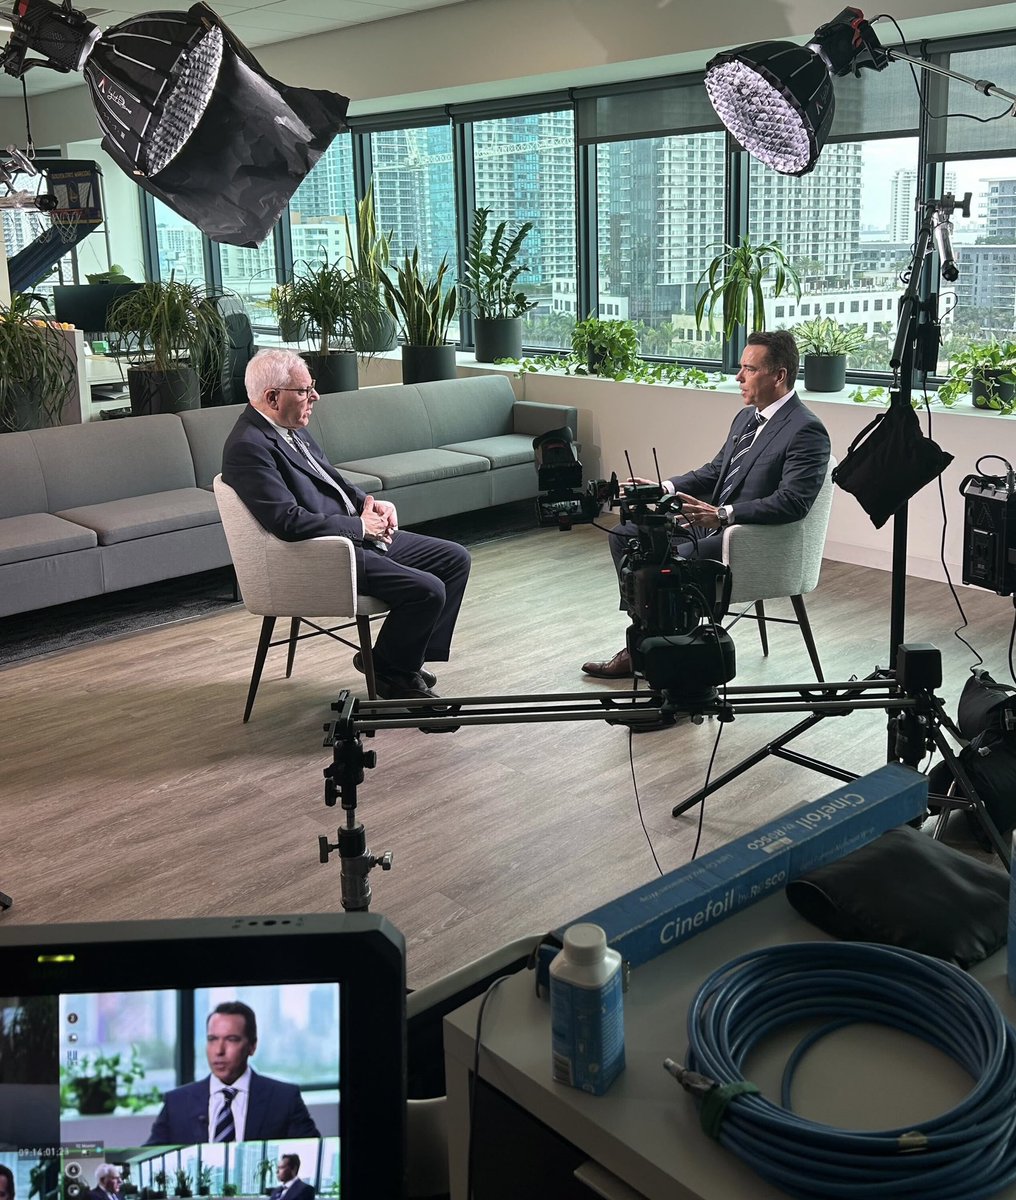 Great sitting down with @DM_Rubenstein in our Miami office to discuss software buyouts, interest rates, opportunities in Miami & my advice to those looking to get into the buyout world. Watch the full conversation on the premiere of @BloombergTV Wealth tonight.